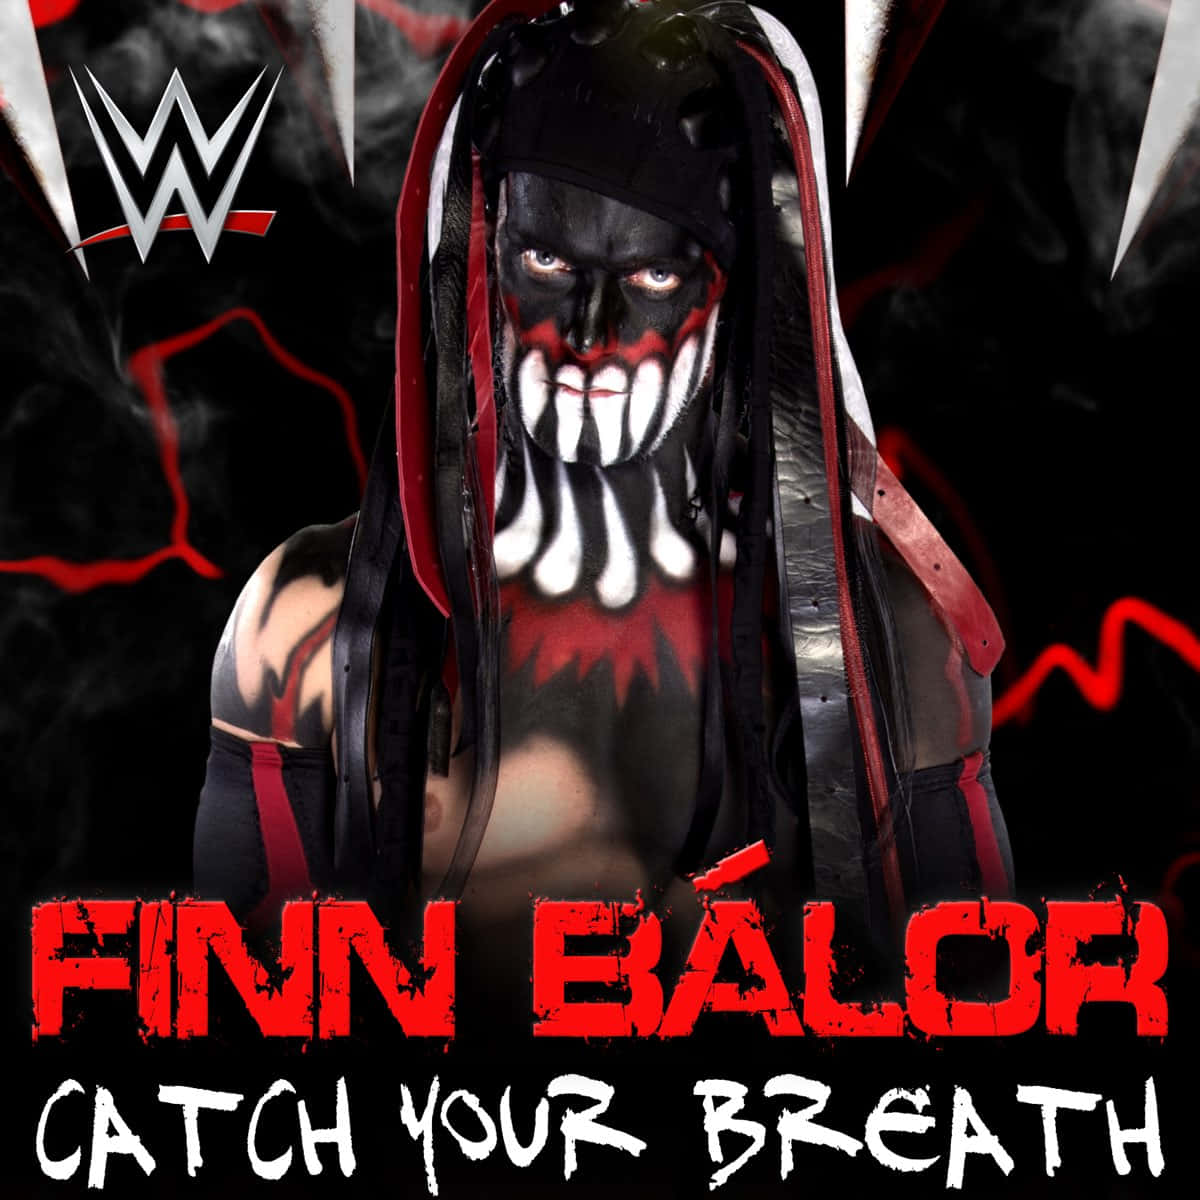 New wallpaper design featuring the new and current WWE US Champion Finn  Balor hope you all like it  rWWE